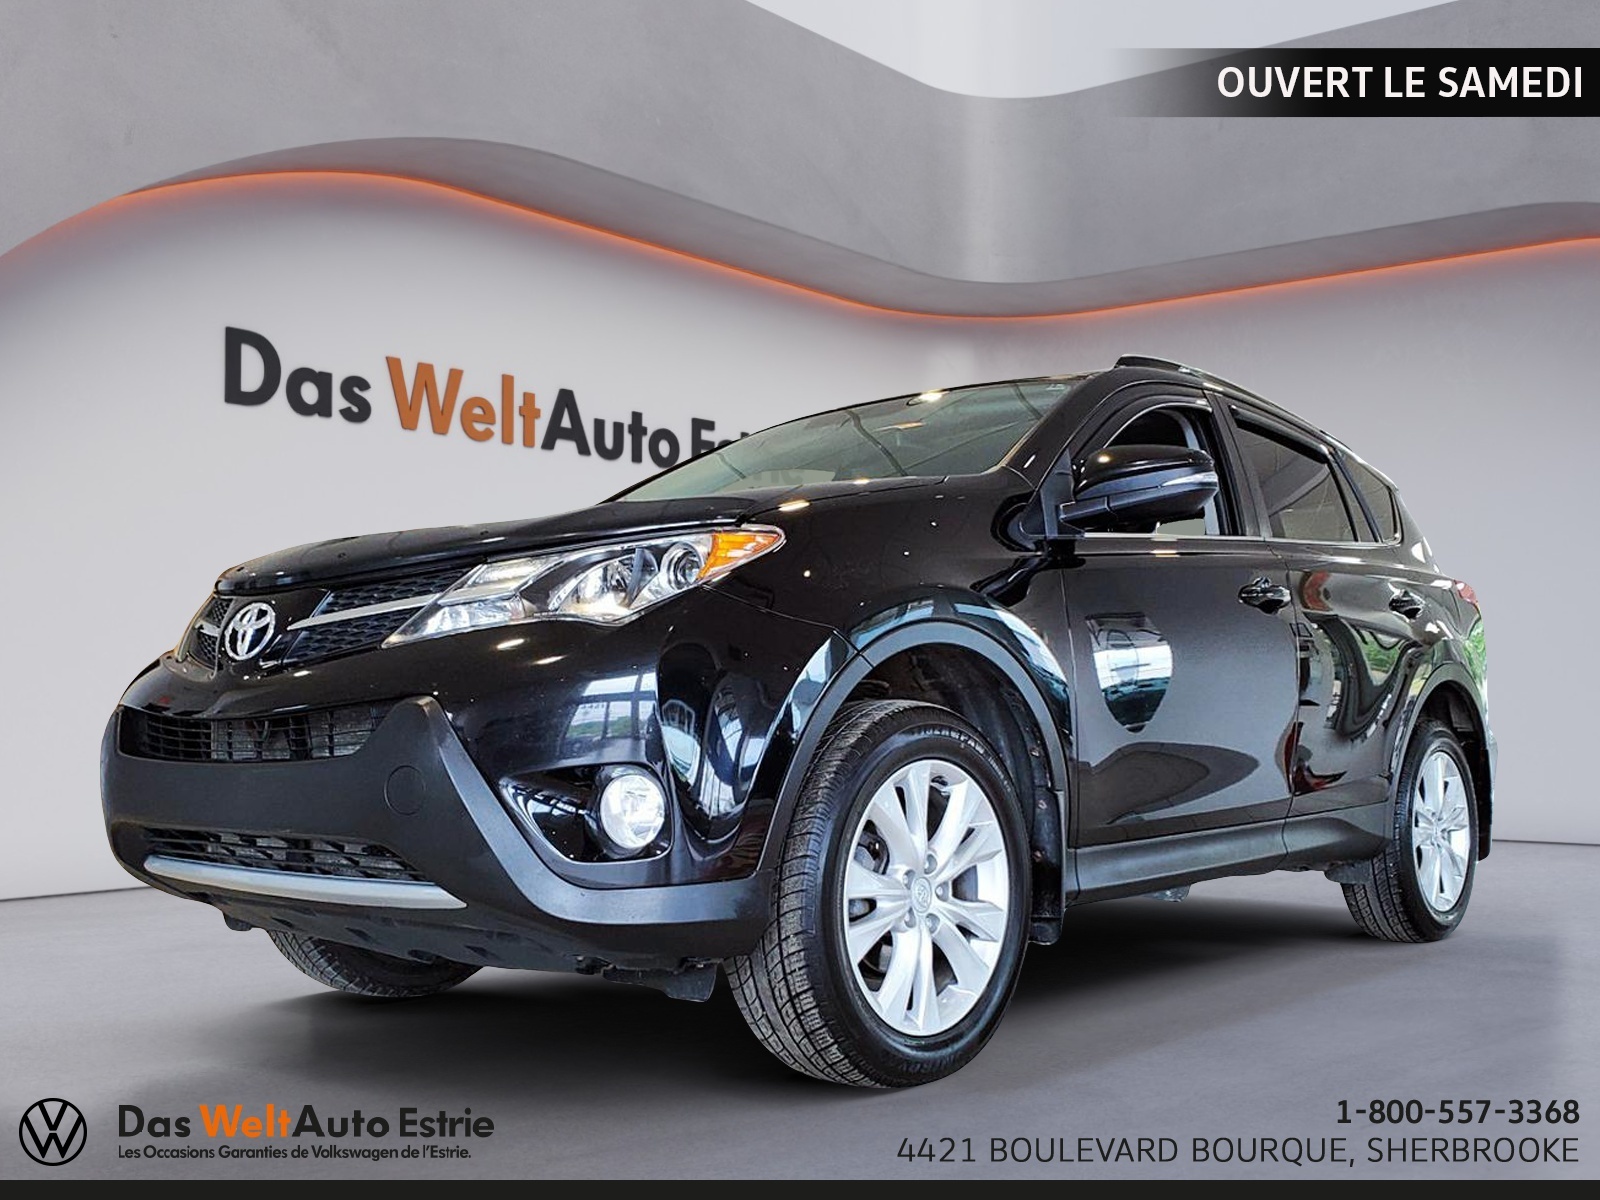 2015 Toyota RAV4 LIMITED / AWD / CUIR 2 TONS / AUTO / TOIT OUVRANT 